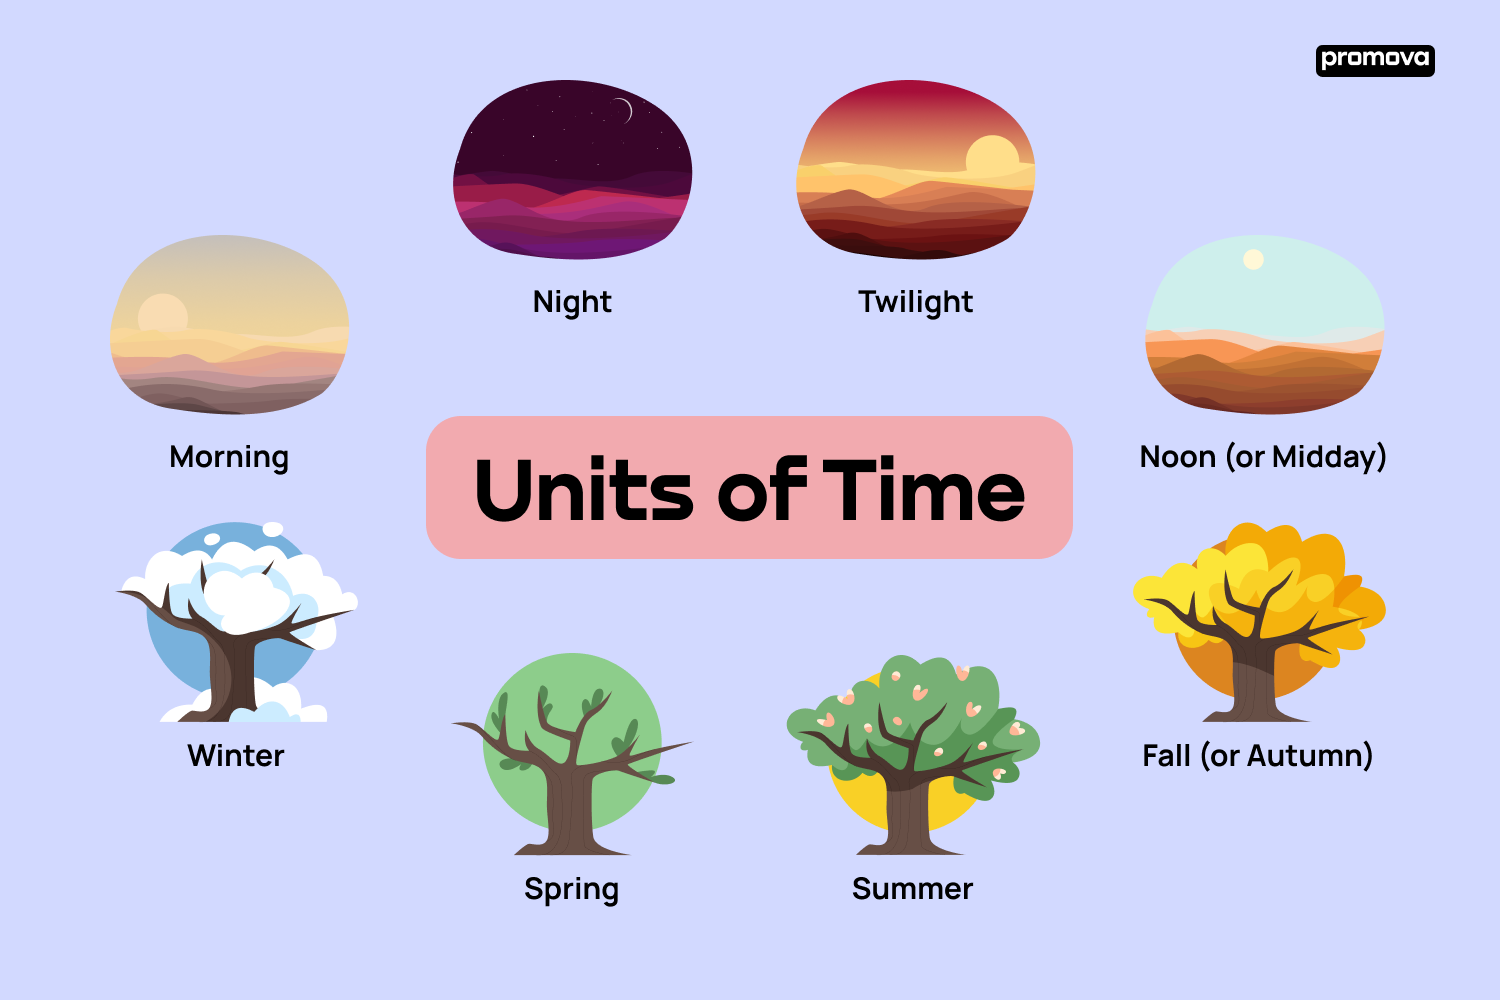 Units of Time